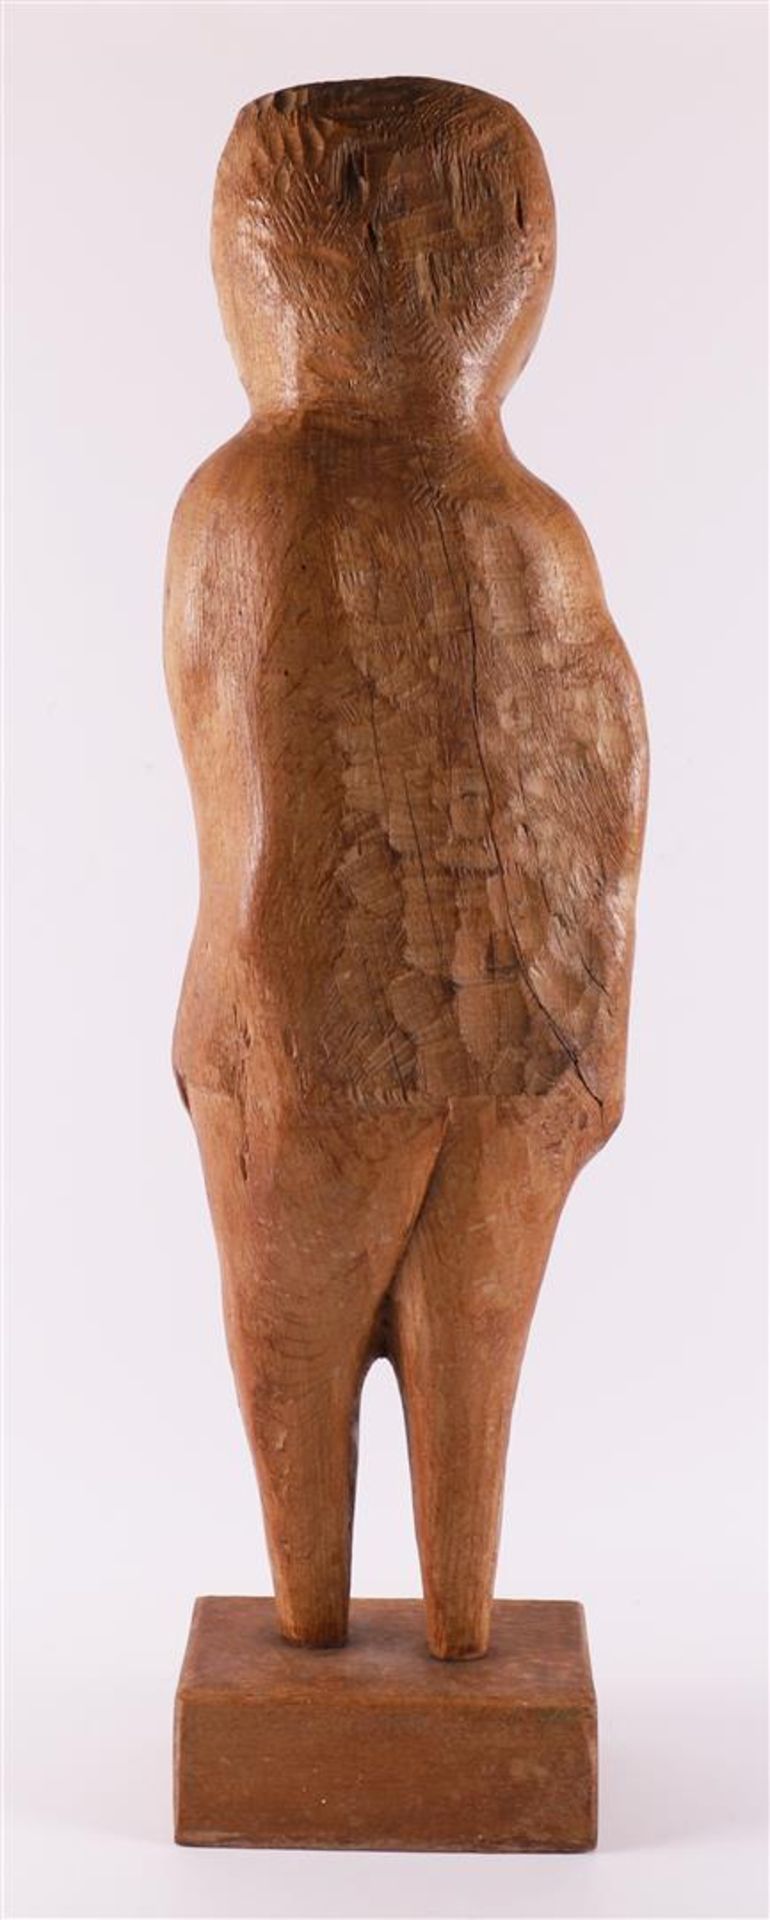 Eggen, Gene (1921-2000) A wooden sculpture of a woman, 2nd half of the 20th cent - Image 4 of 7